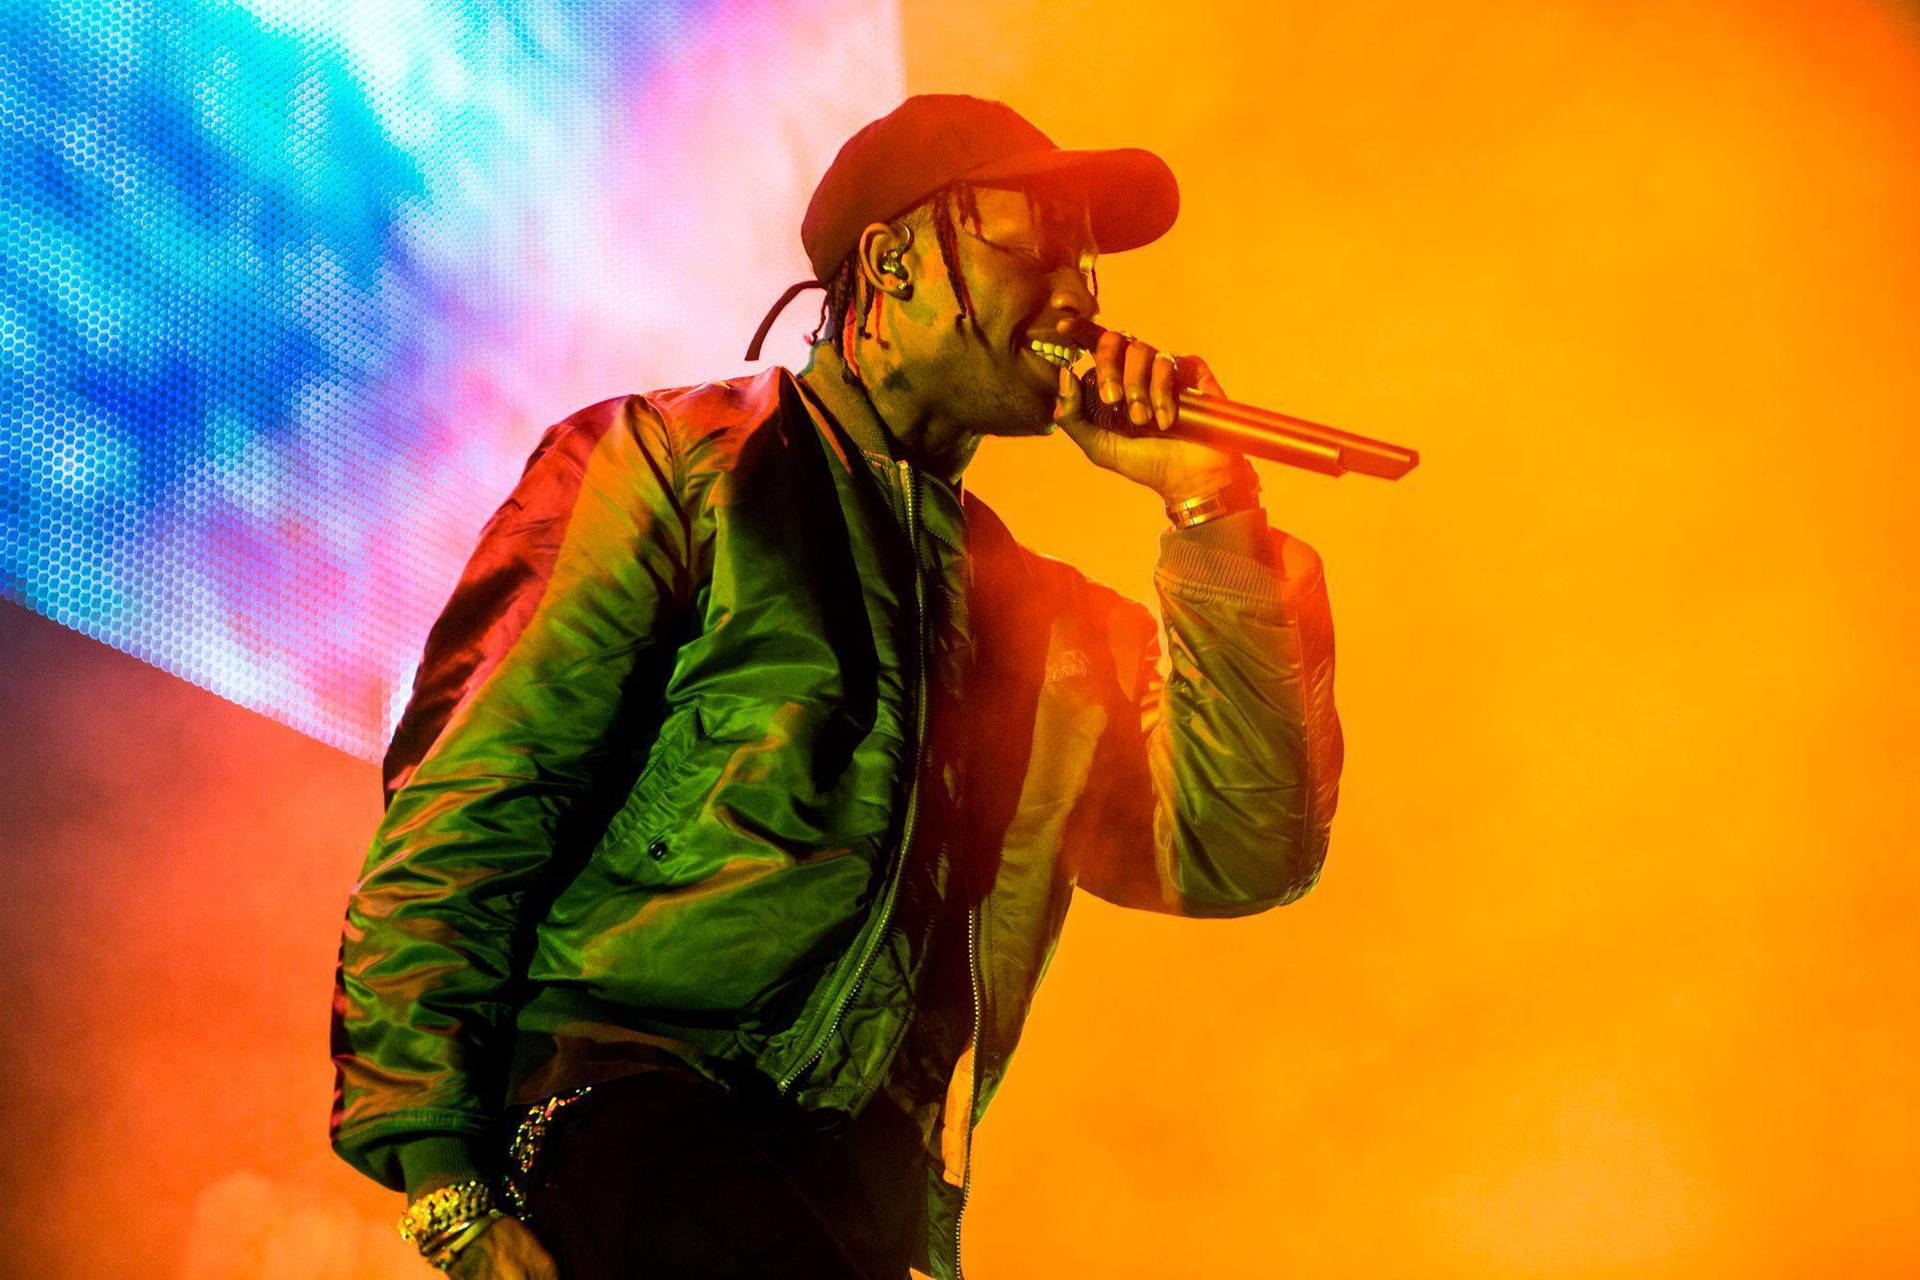 Travis Scott demonstrates his success and the bright future ahead. Wallpaper